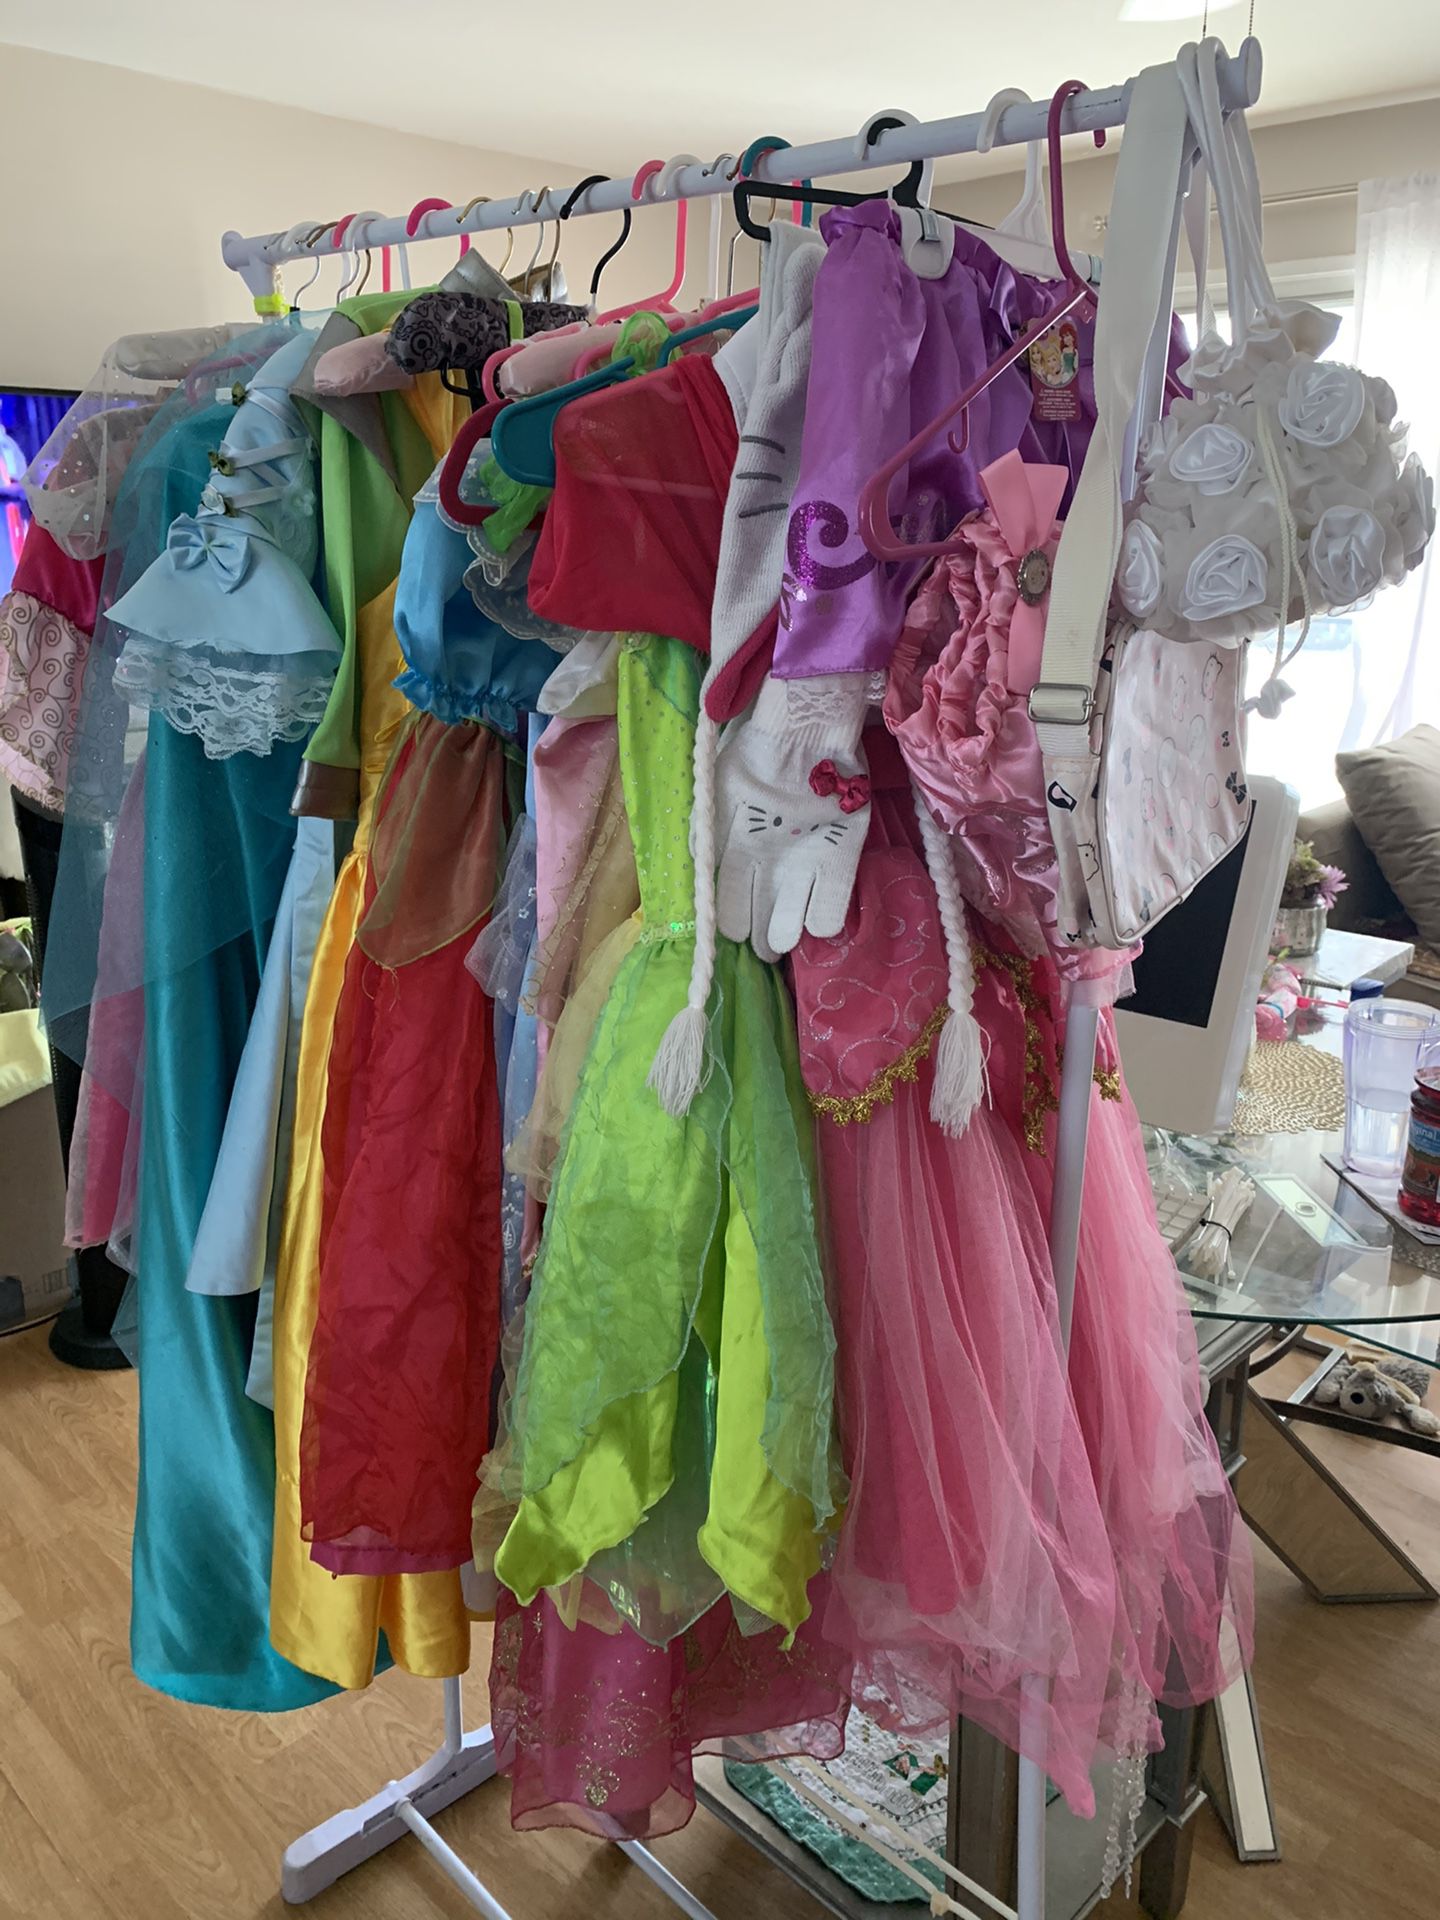 pre-owned princess costumes great for Halloween or any occasion starting at $5 & up. Some authentic Disney store.. all sizes come check out